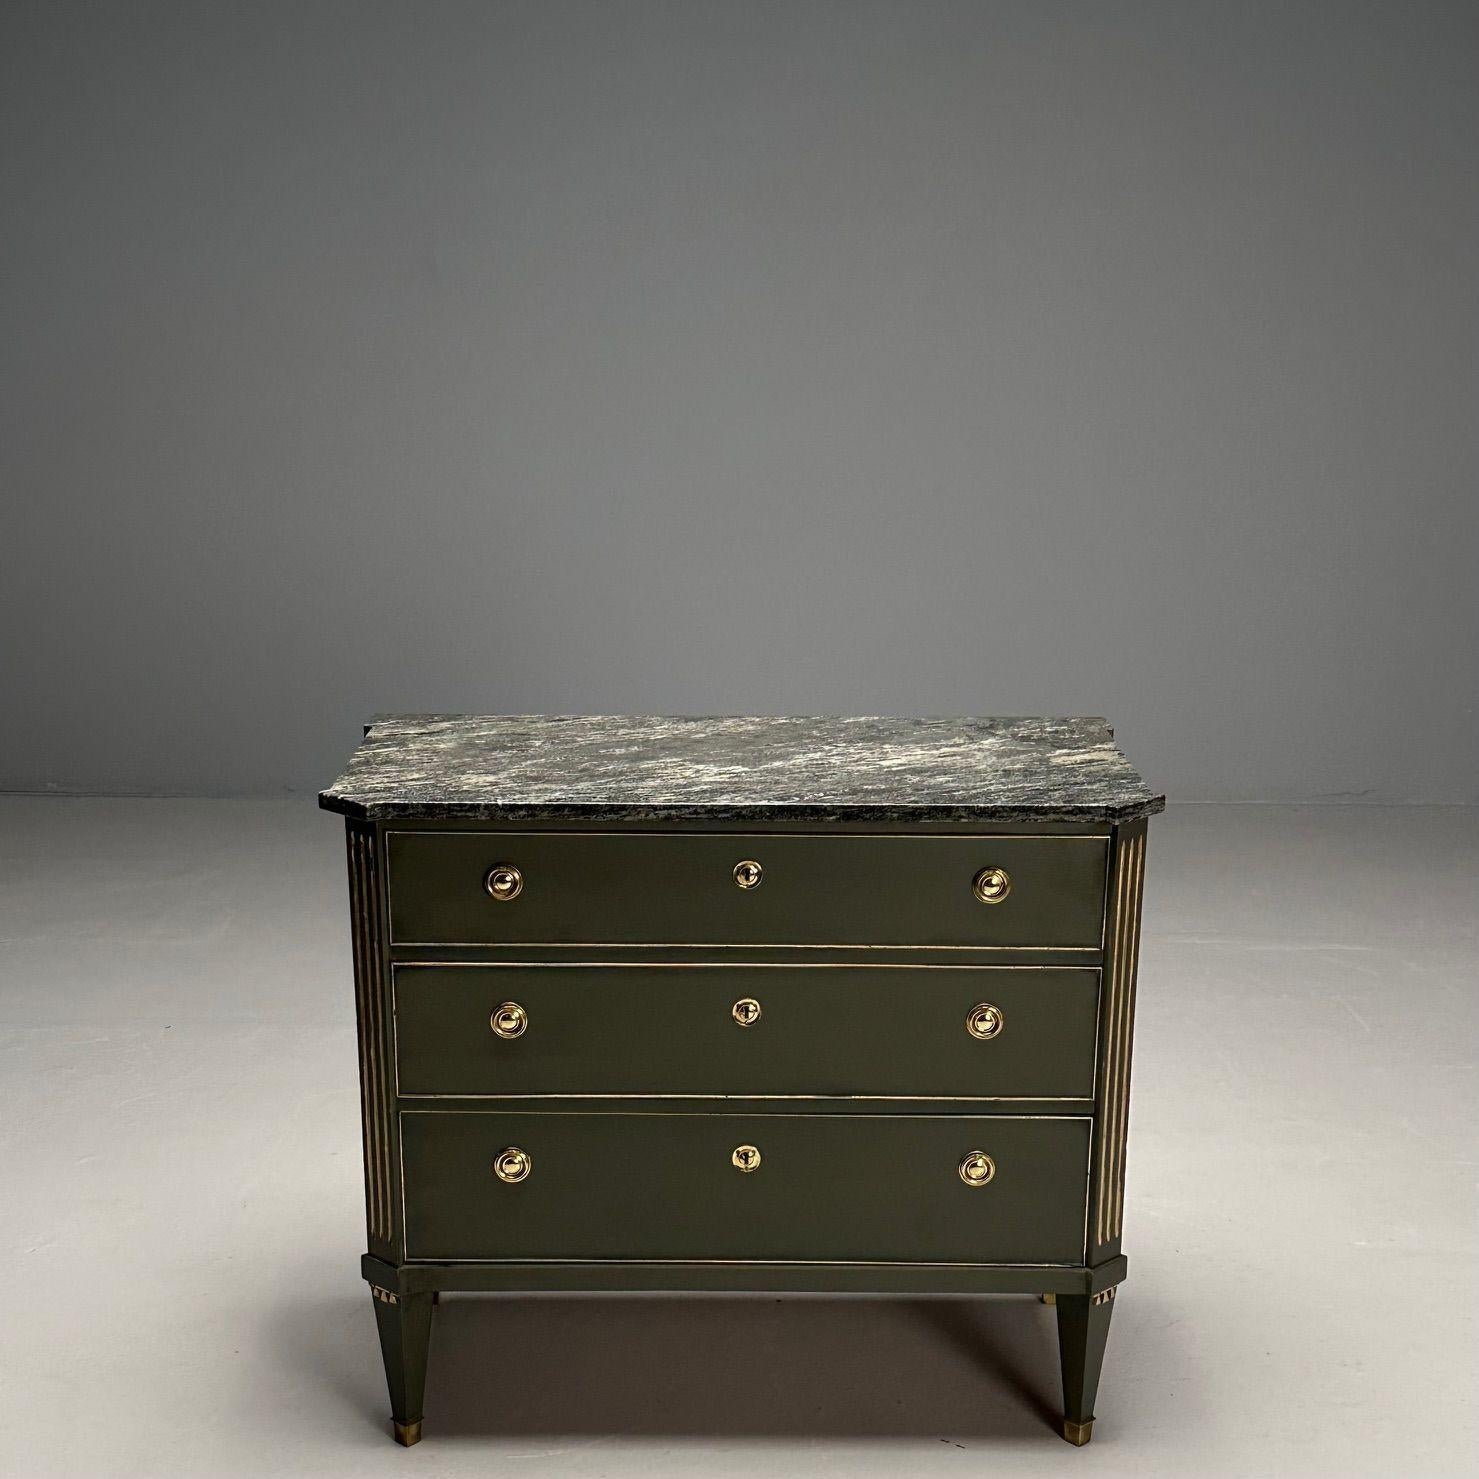 Gustavian, Swedish Commode, Louis XVI Style, Green Paint, Marble, Brass, Sweden, 1980s

Gustavian chest of drawers or dresser designed and produced in Sweden in the later half of the 20th century. Having a marble top, fluted sides, and three drawers